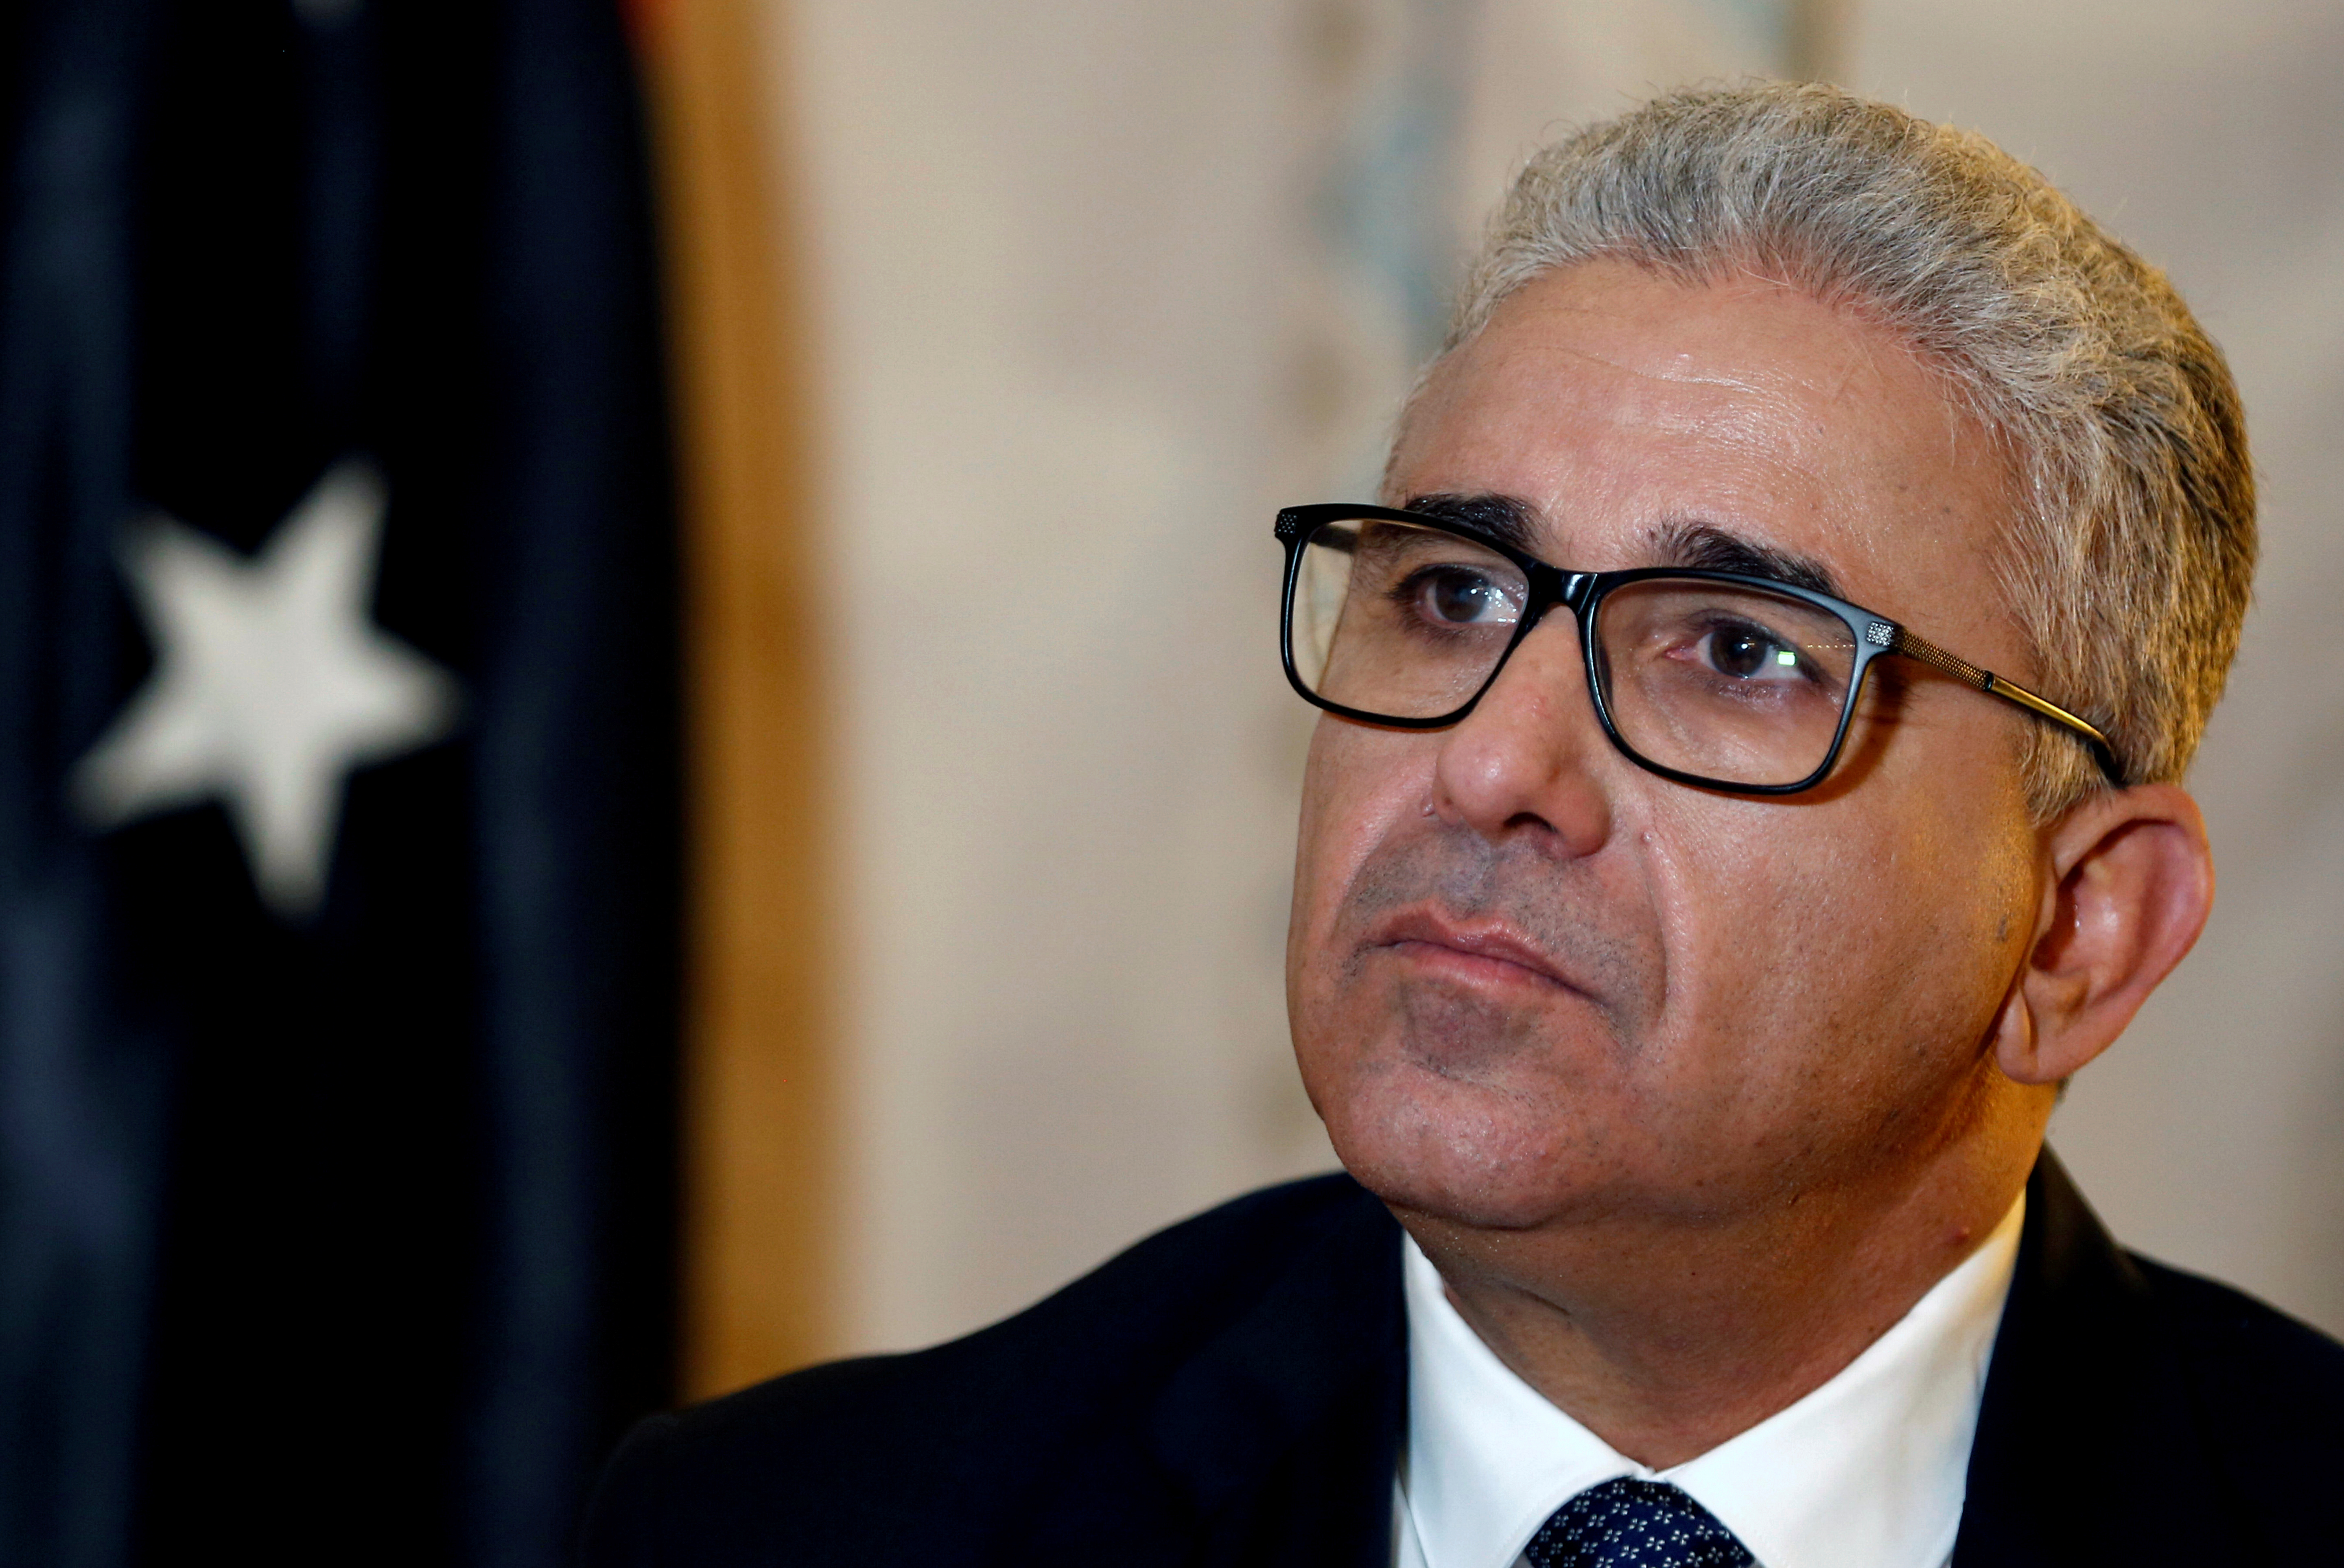 Libya's interior minister Fathi Bashagha attends an interview with Reuters in Tunis